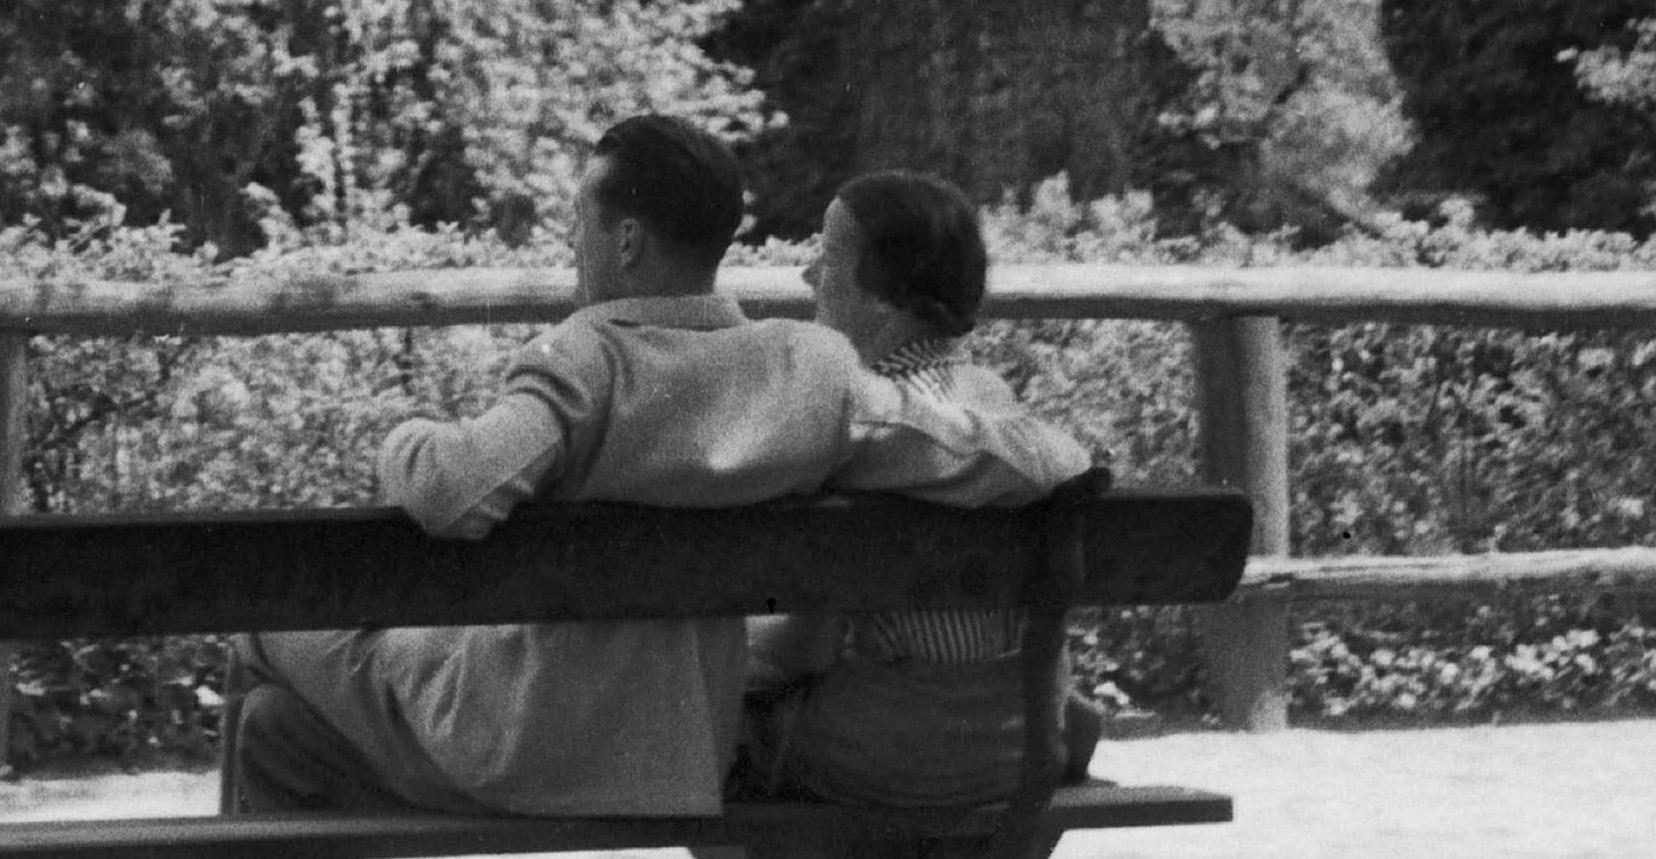 Couple on bench at Heidelberg castle, Germany 1936, Printed Later  - Modern Photograph by Karl Heinrich Lämmel